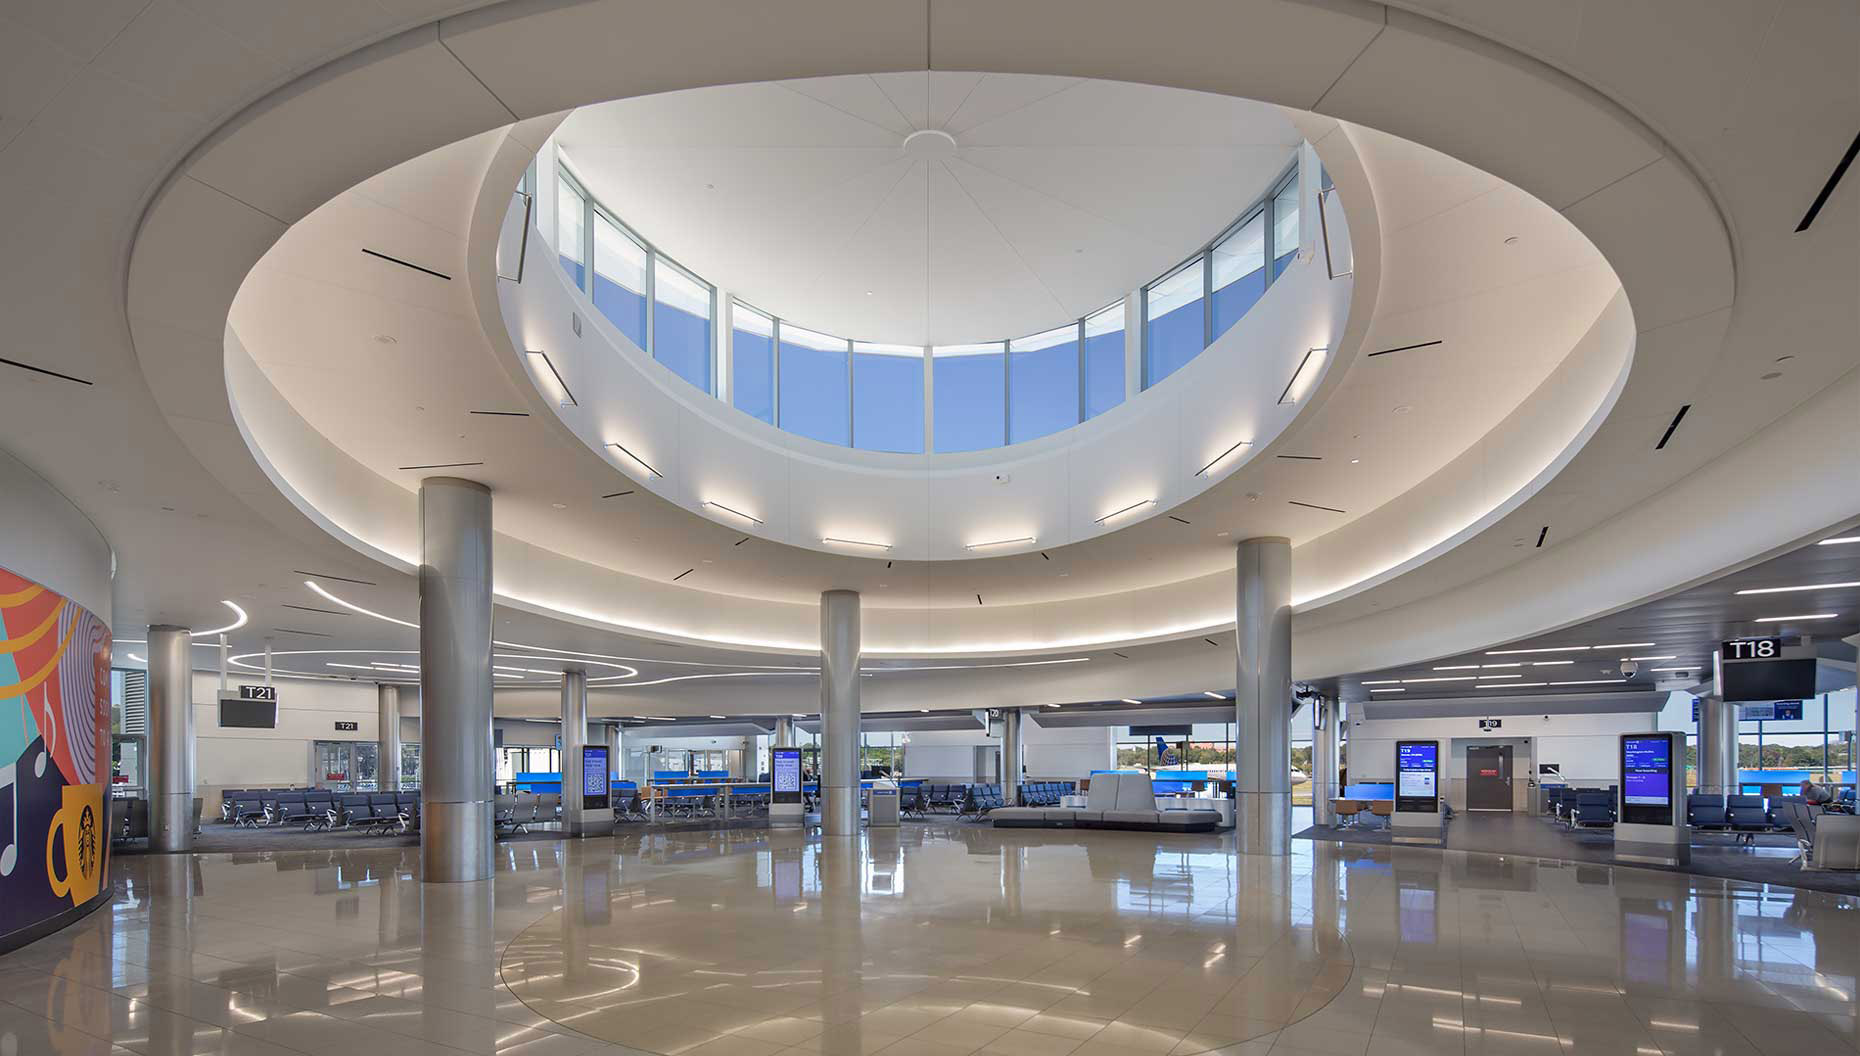 A view of the open and airy oculus at the center of the Concourse T North Expansion at HJAIA